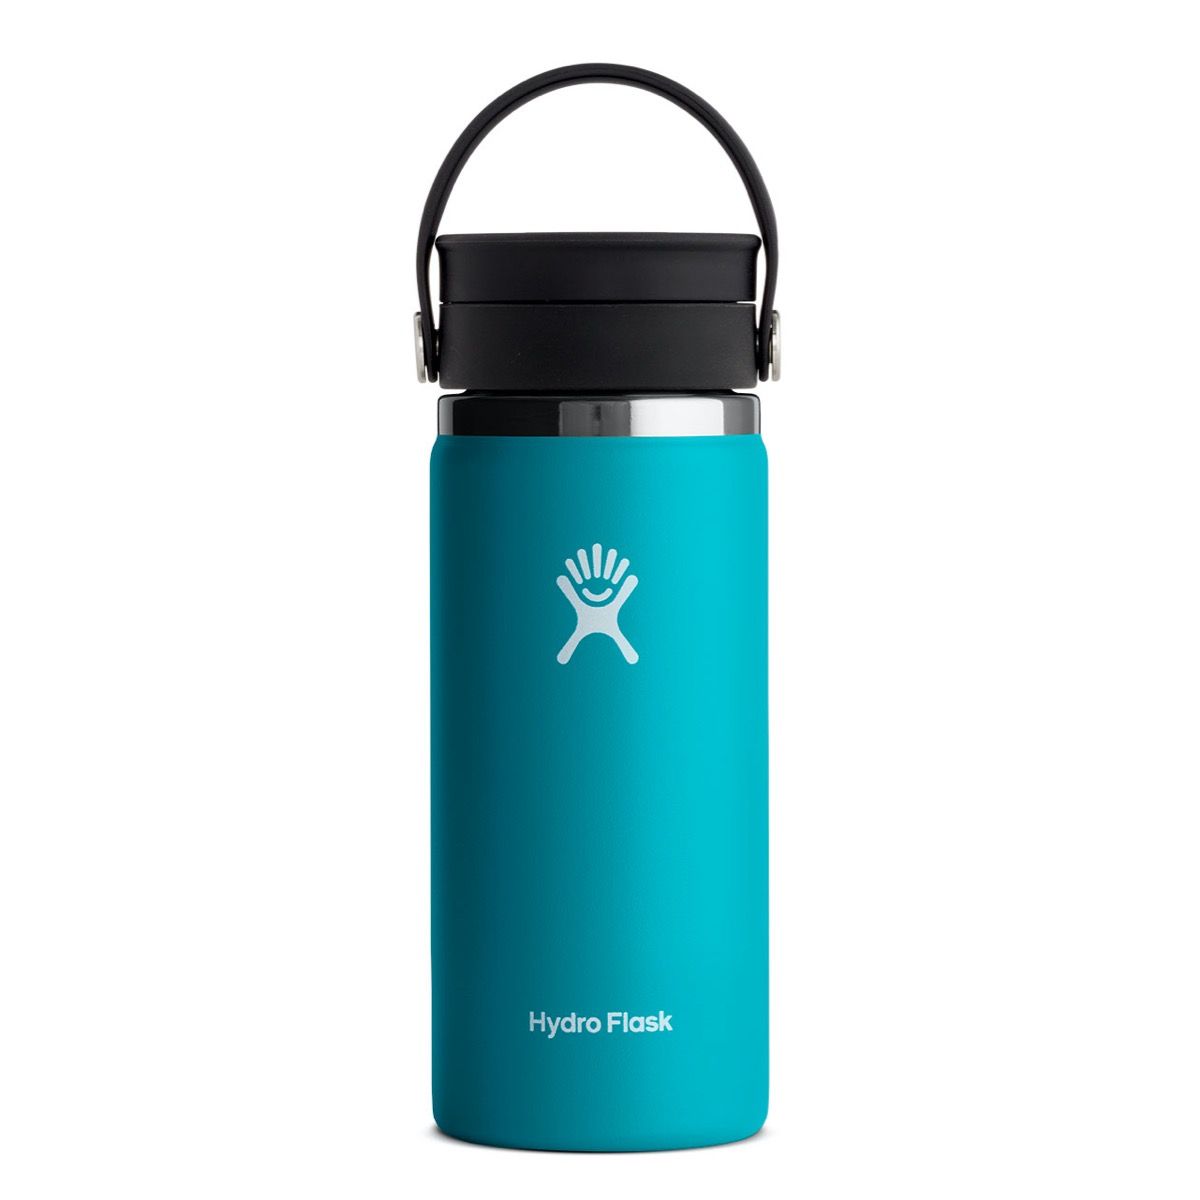 Hydro Flask - 16oz. Vacuum Insulated Stainless Steel Sip Lid Coffee Flask Spring 2022 Colors all things being eco chilliwack laguna